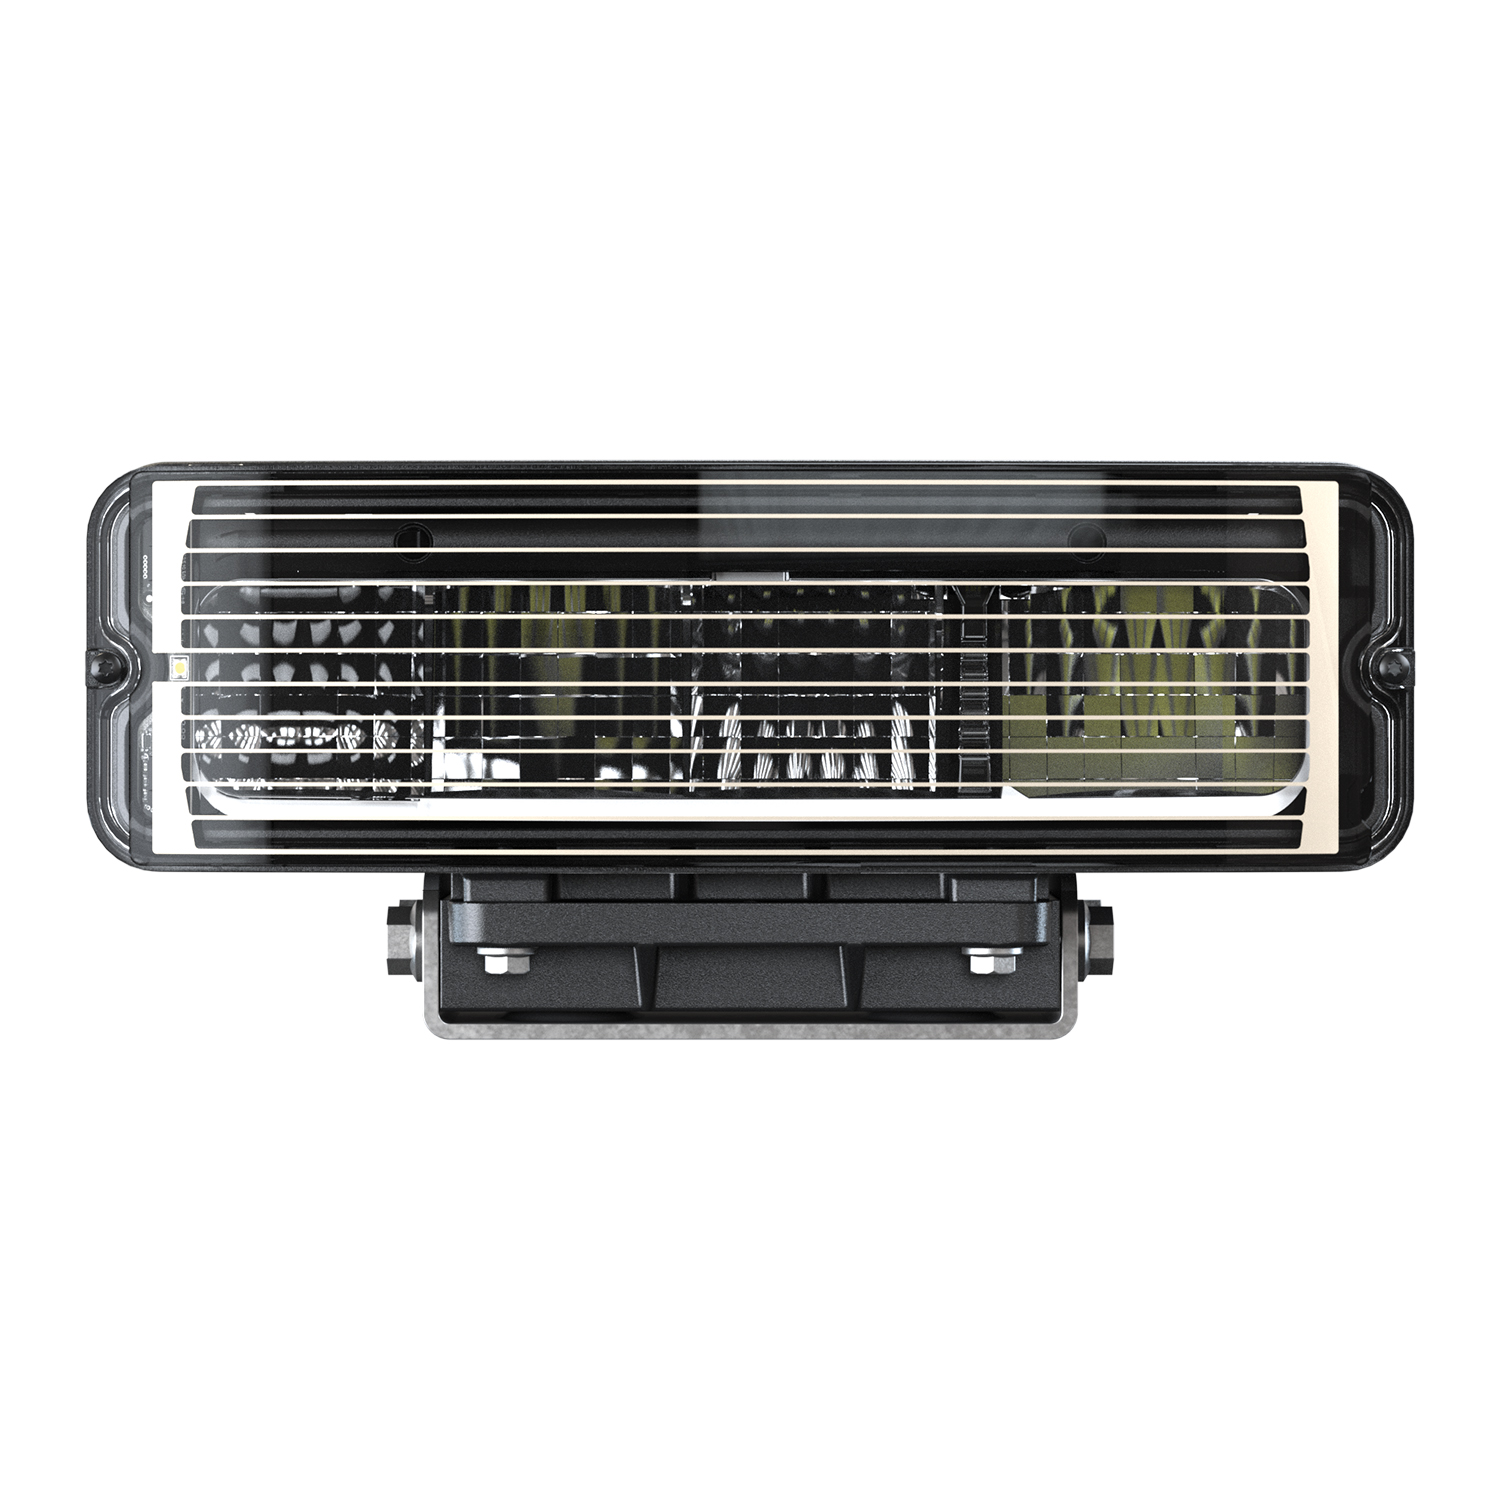 Model 9800 HS LED Heated Headlight Right Hand Front View